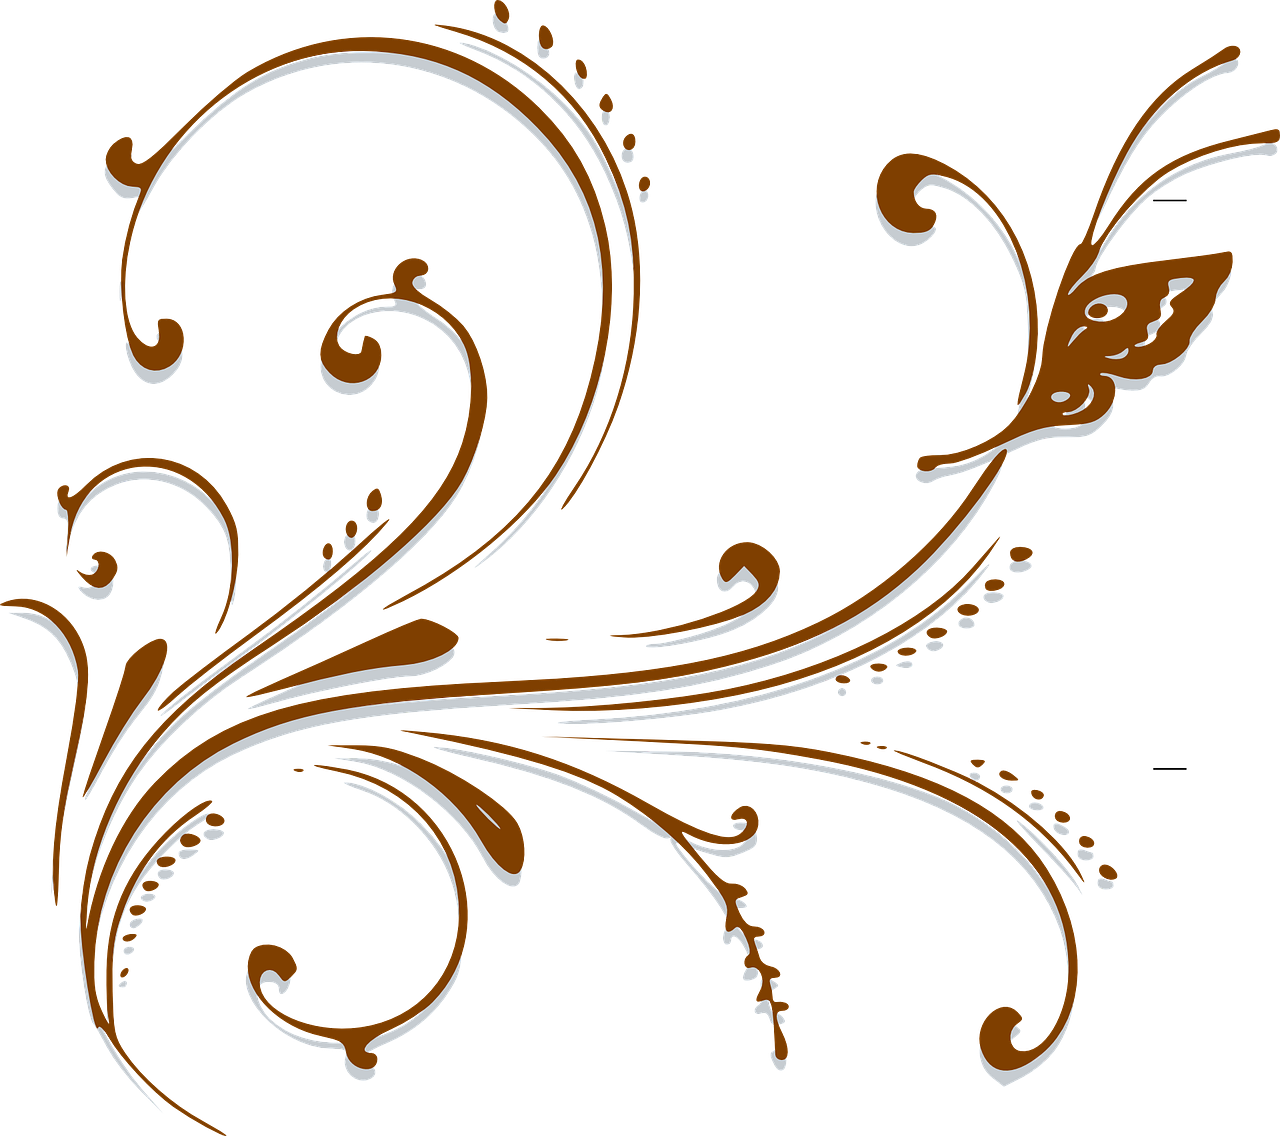 a brown and white floral design on a black background, a digital rendering, arabesque, art nouveau 3d curves and swirls, ((intricate)), random detail, edited